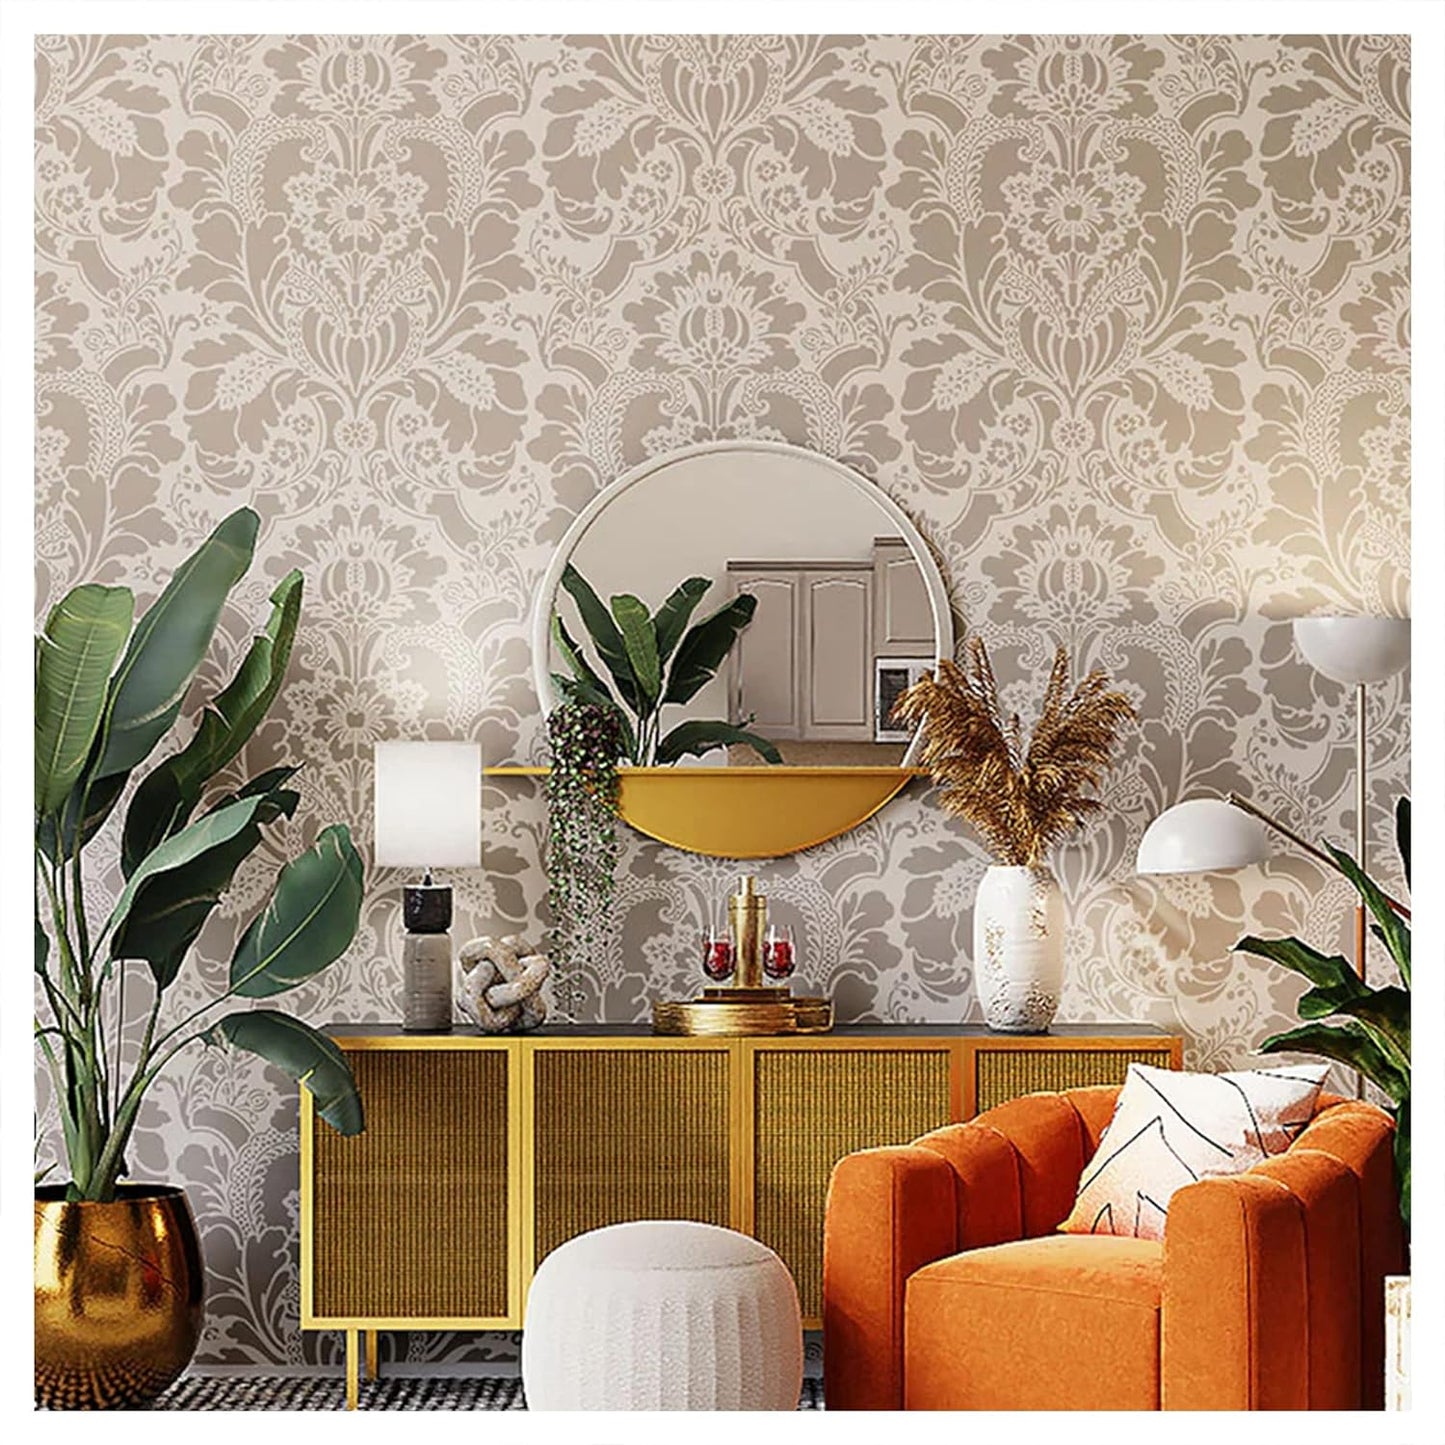 Latest Damask Floral Stencils for Wall Painting - Pack of 1, Sheet Size 36 x 48 inch/Design for Wall Painting 34 X 46 Inch - Large